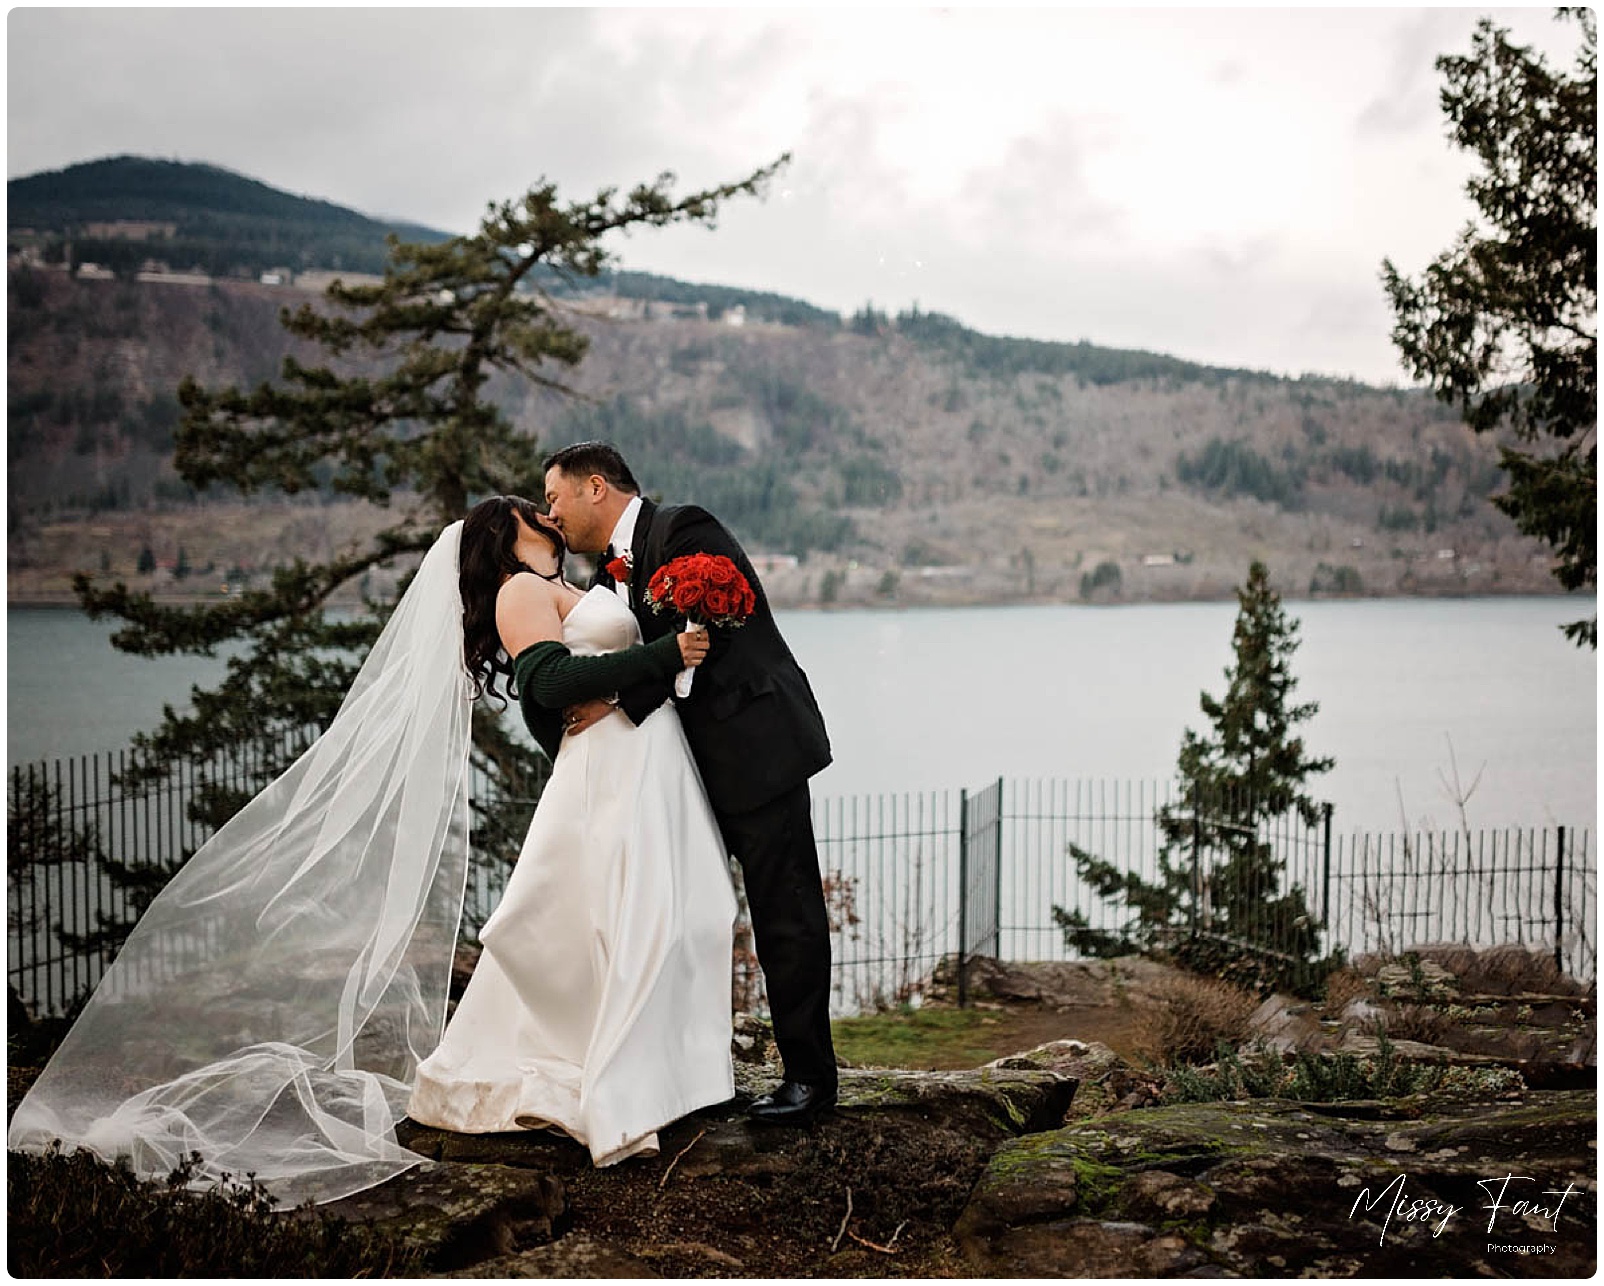 Liz and Mark’s Valentine’s Day Wedding at the Columbia Gorge Hotel in Hood River, Oregon